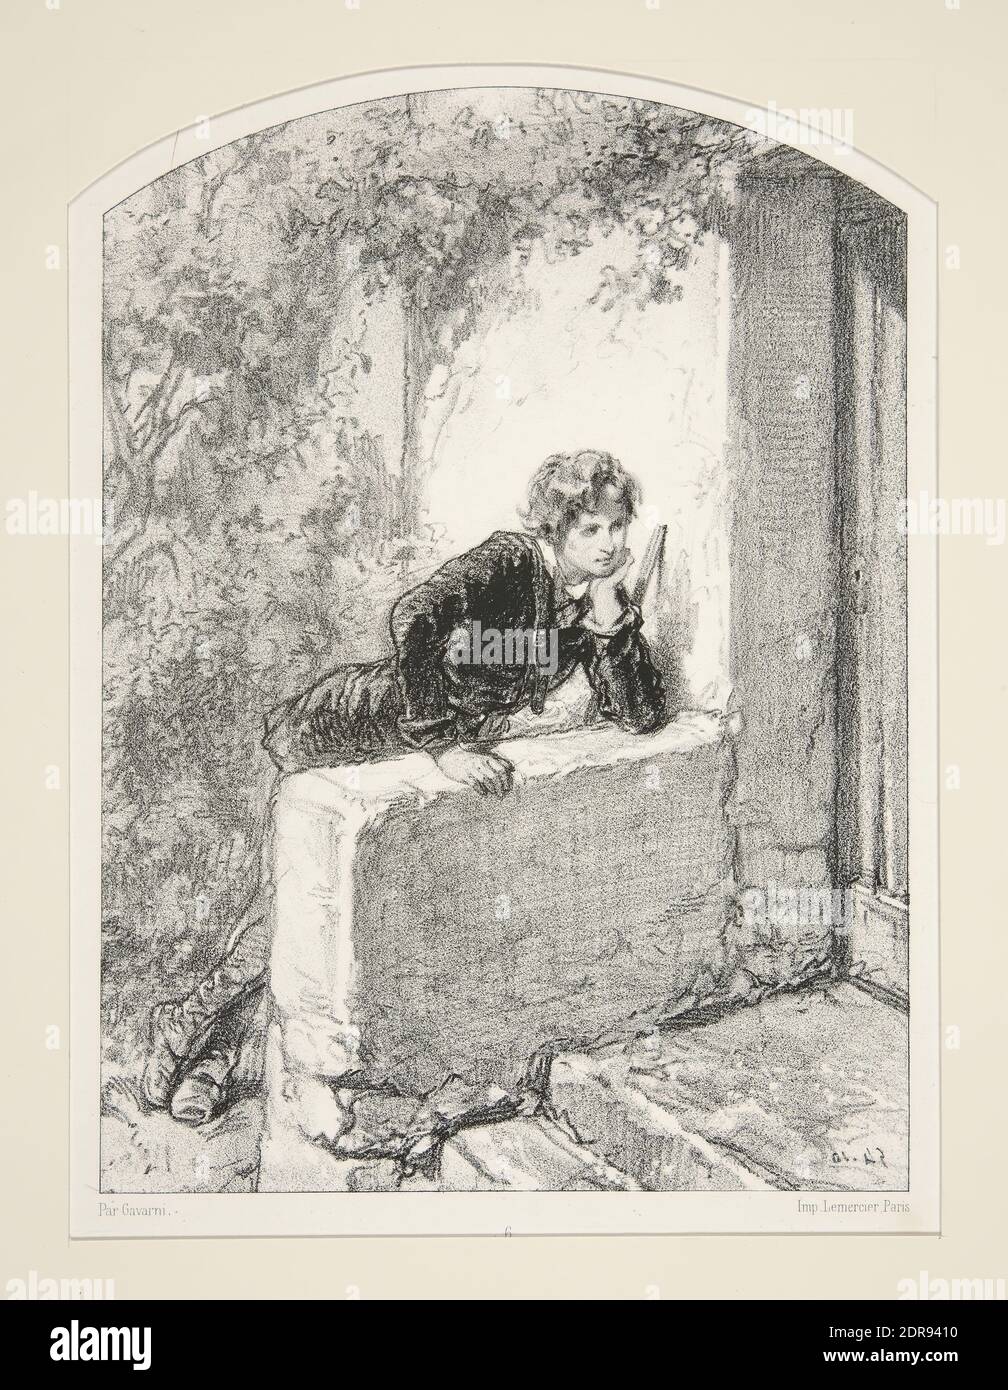 Artist: Paul Gavarni, French, 1804–1866, Chanson, Lithograph, French, 19th century, Works on Paper - Prints Stock Photo